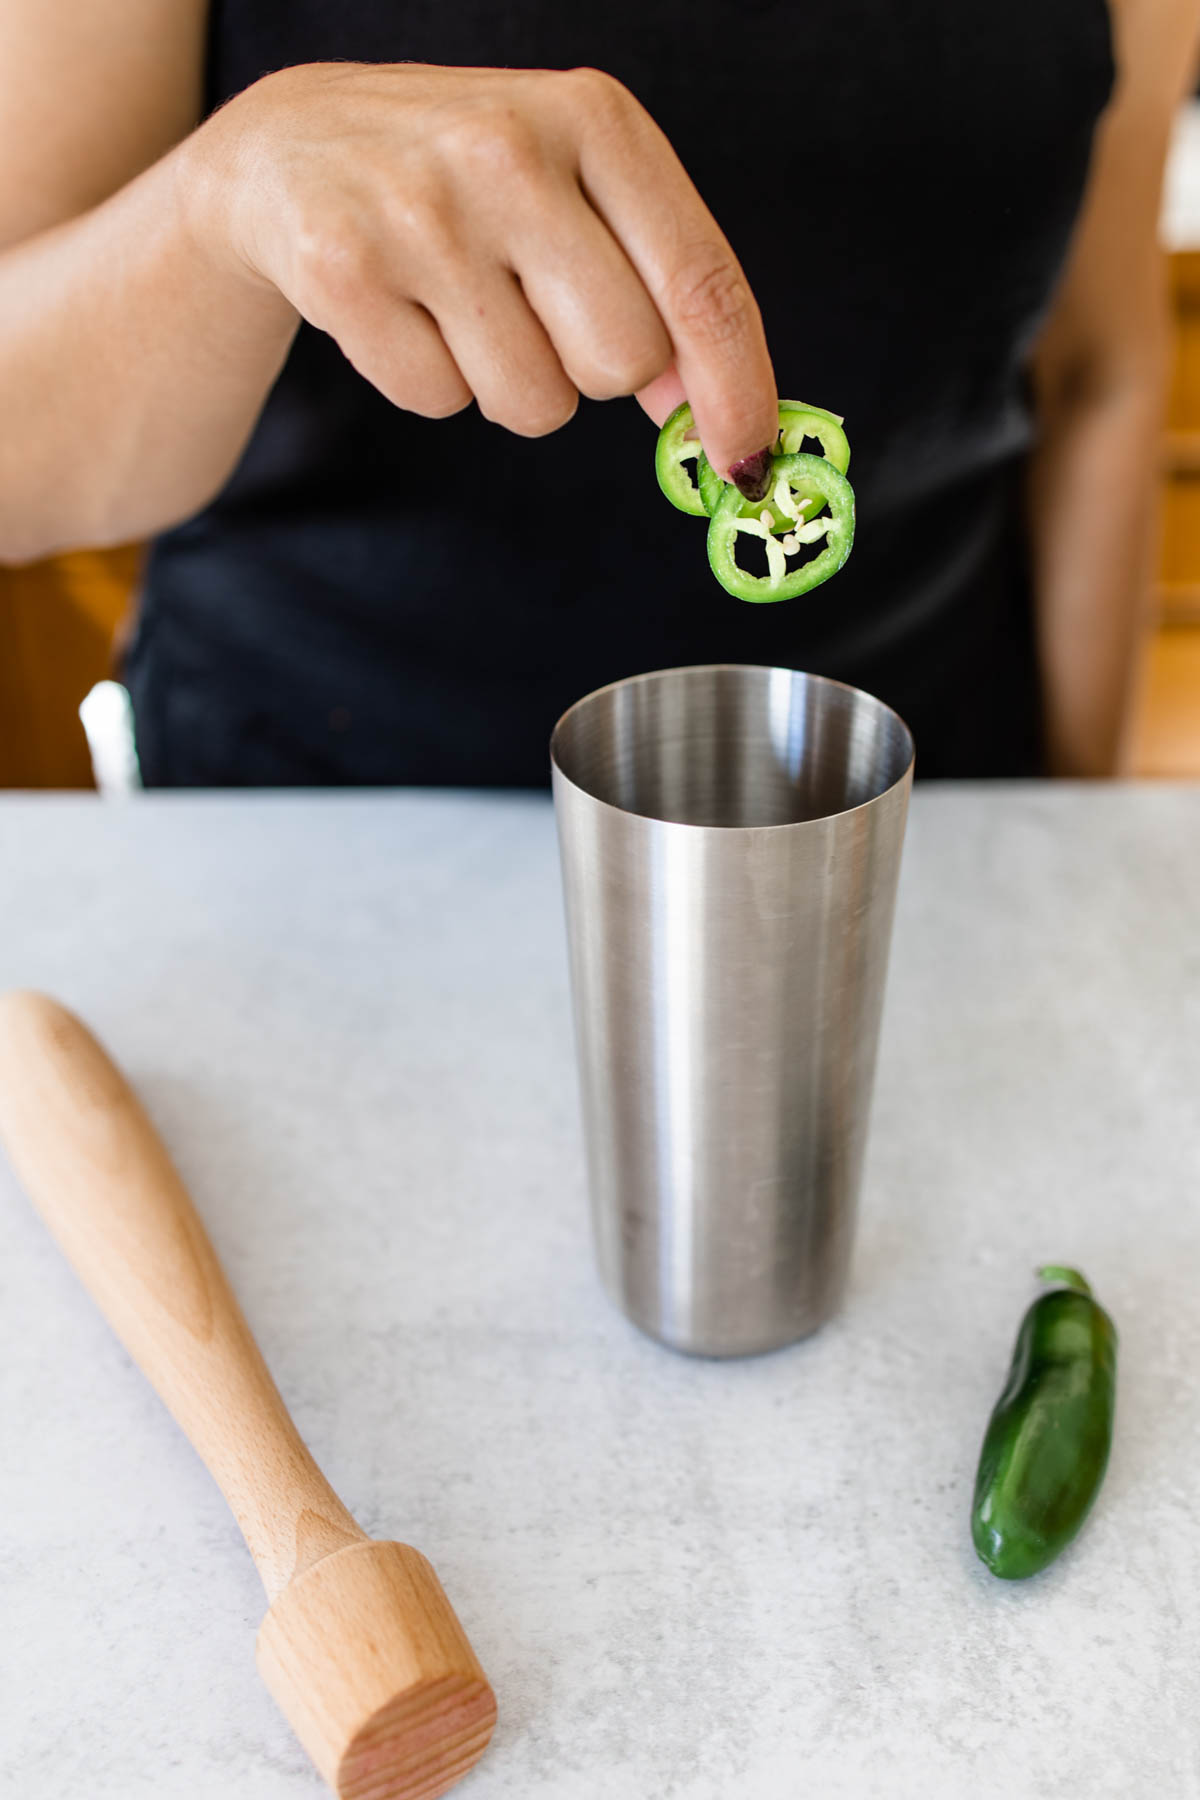 A cocktail shaker with a muddler on the table next to it and a woman adding slices of jalapeño into a cocktail shaker.